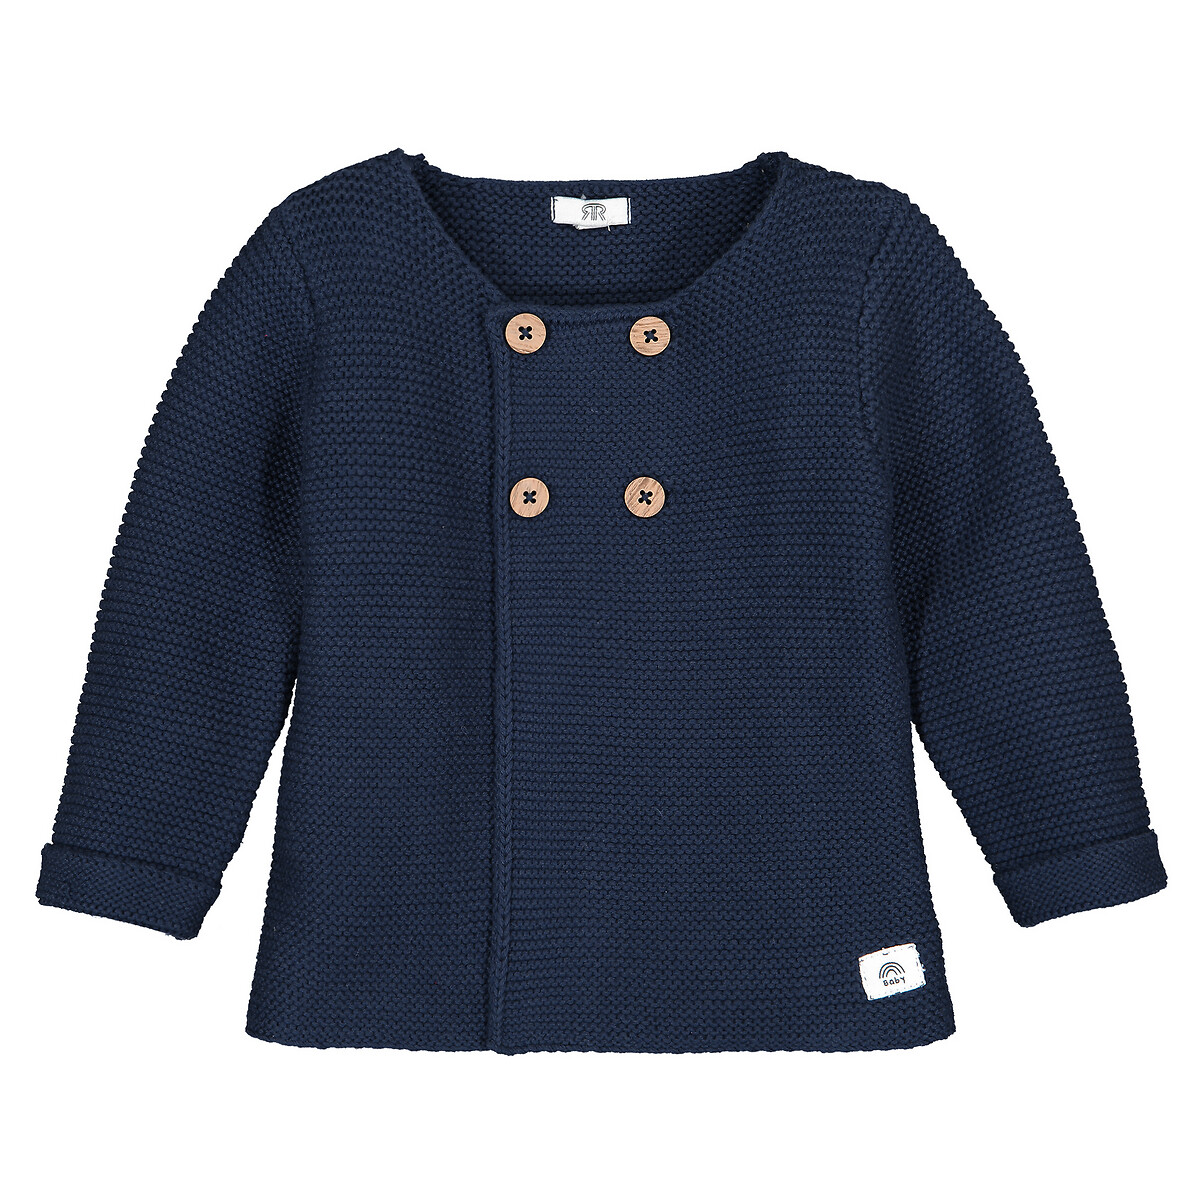 Garter Stitched Cardigan in Organic Cotton Knit